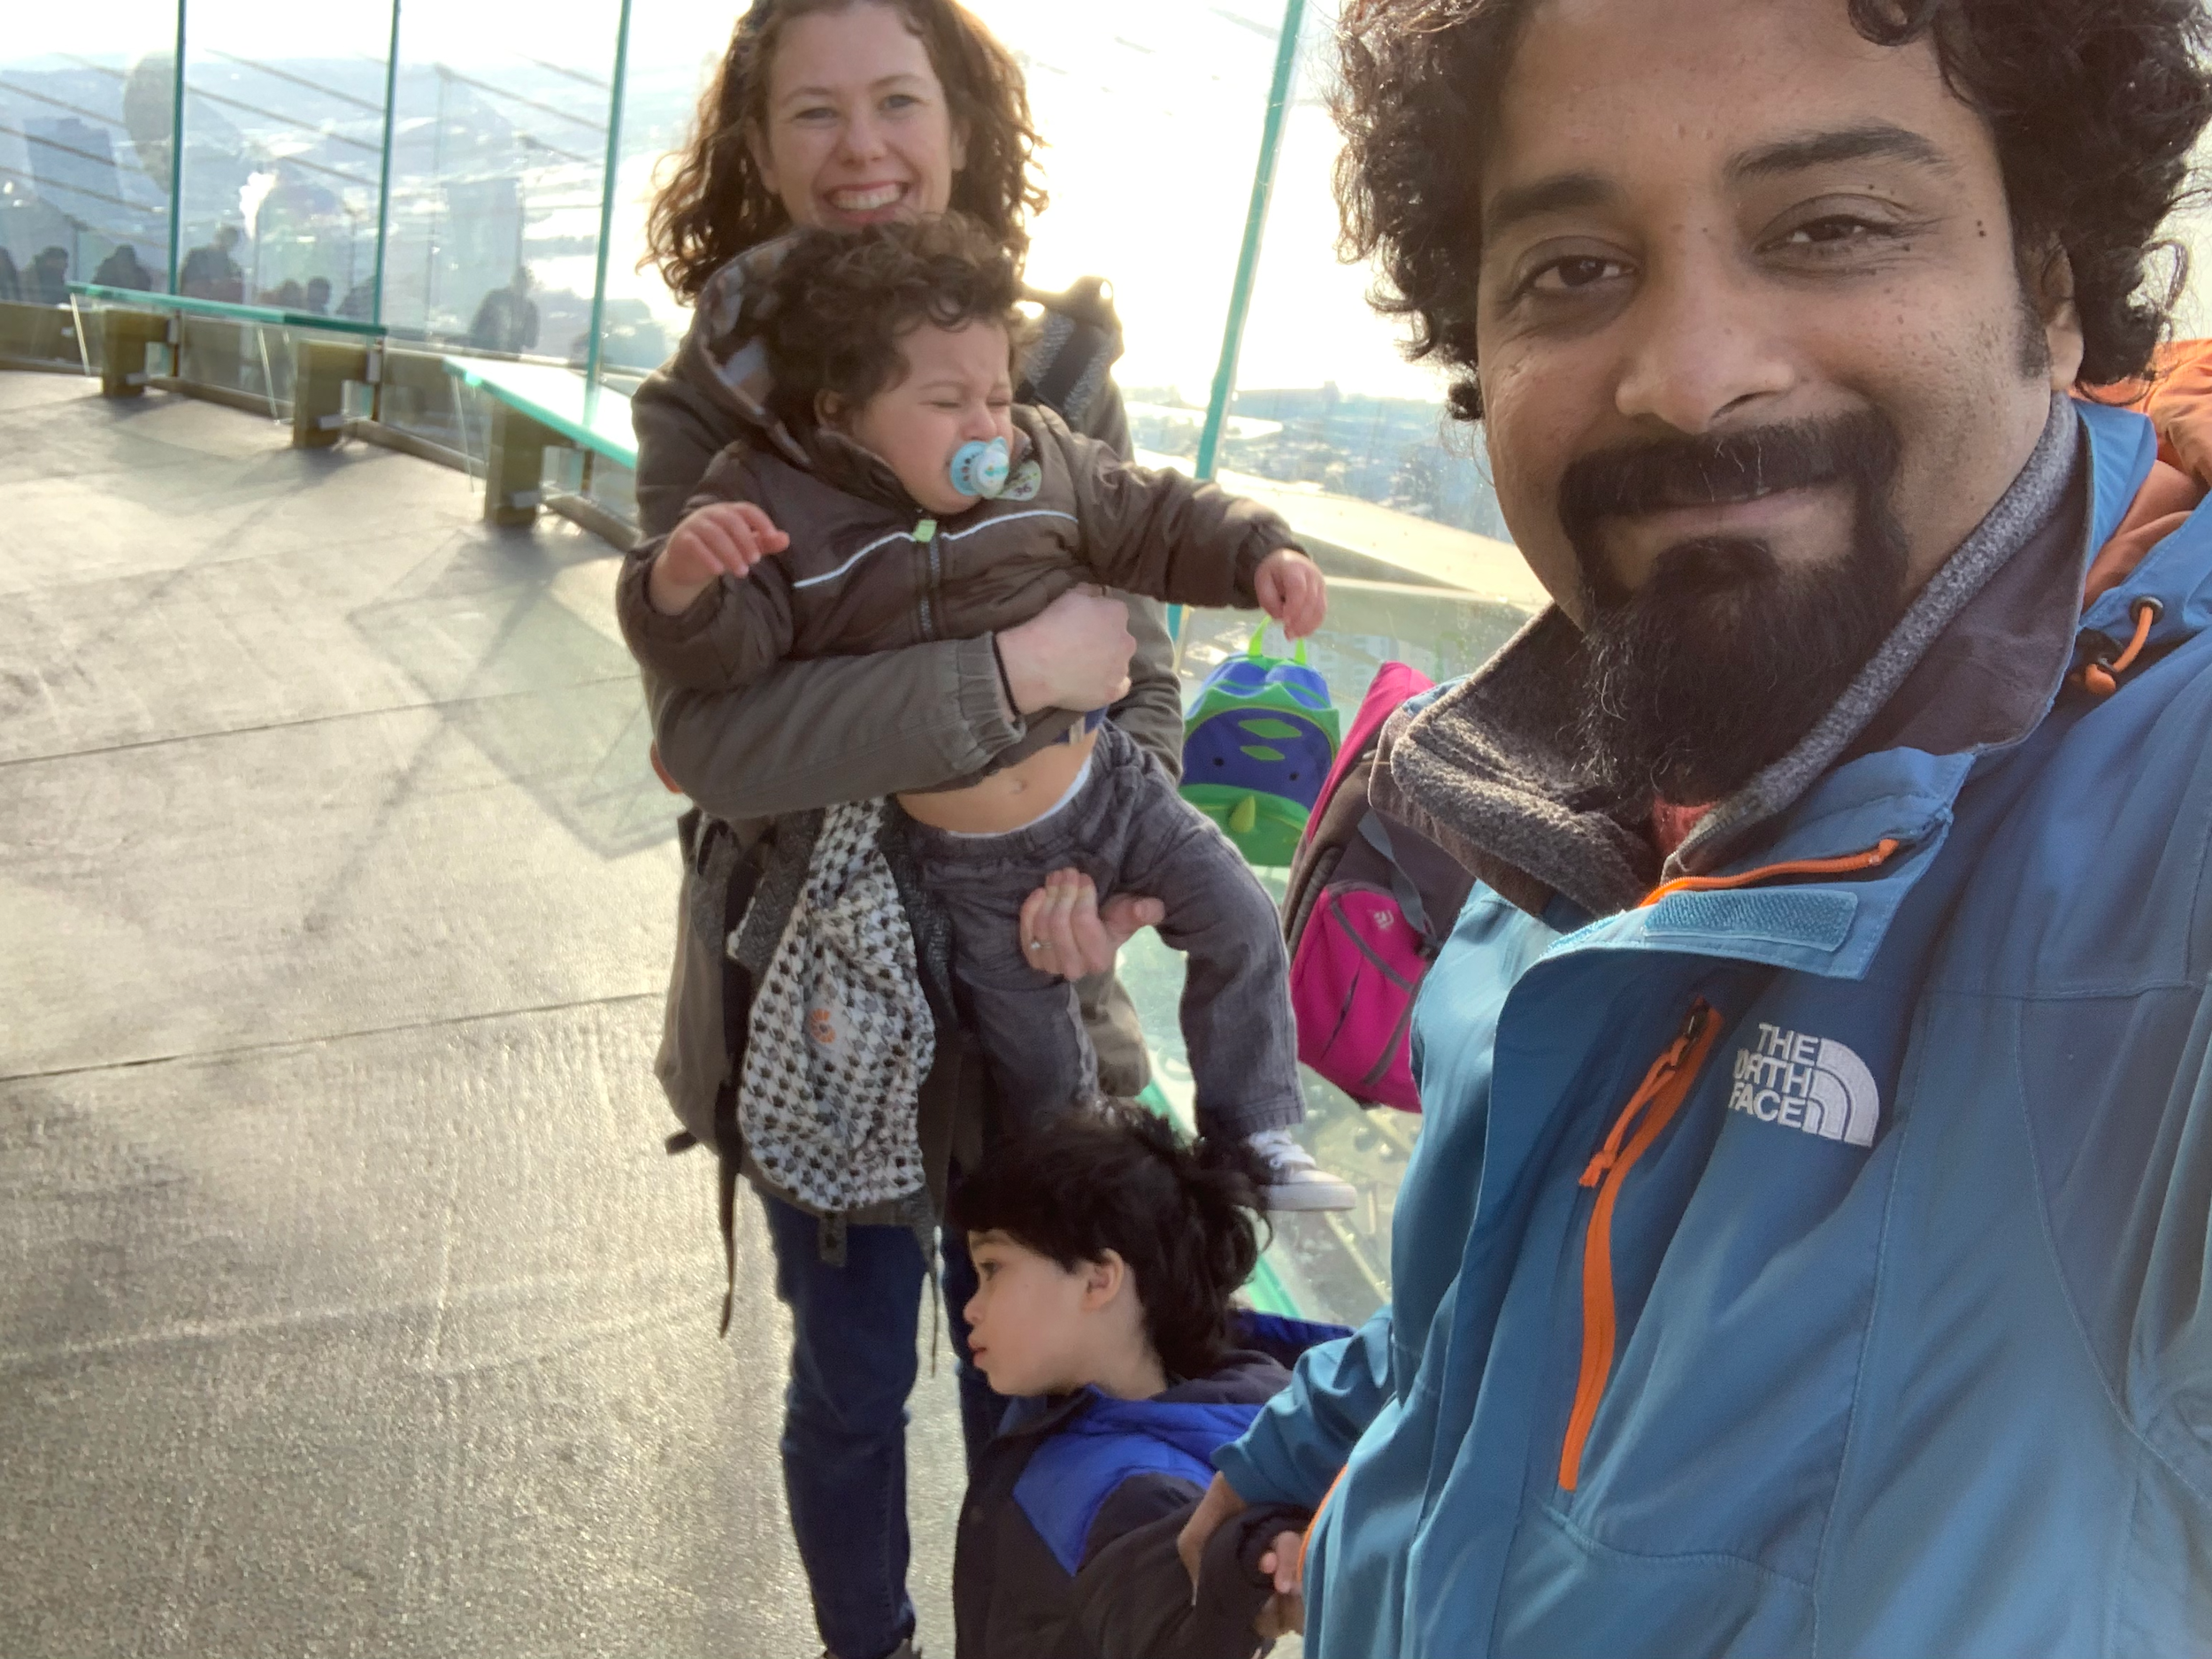 Family visit to the Space Needle with lab affiliates Meg and the boys (Partha, 3 y.o and a bit fussy Surya 1 y.o)!